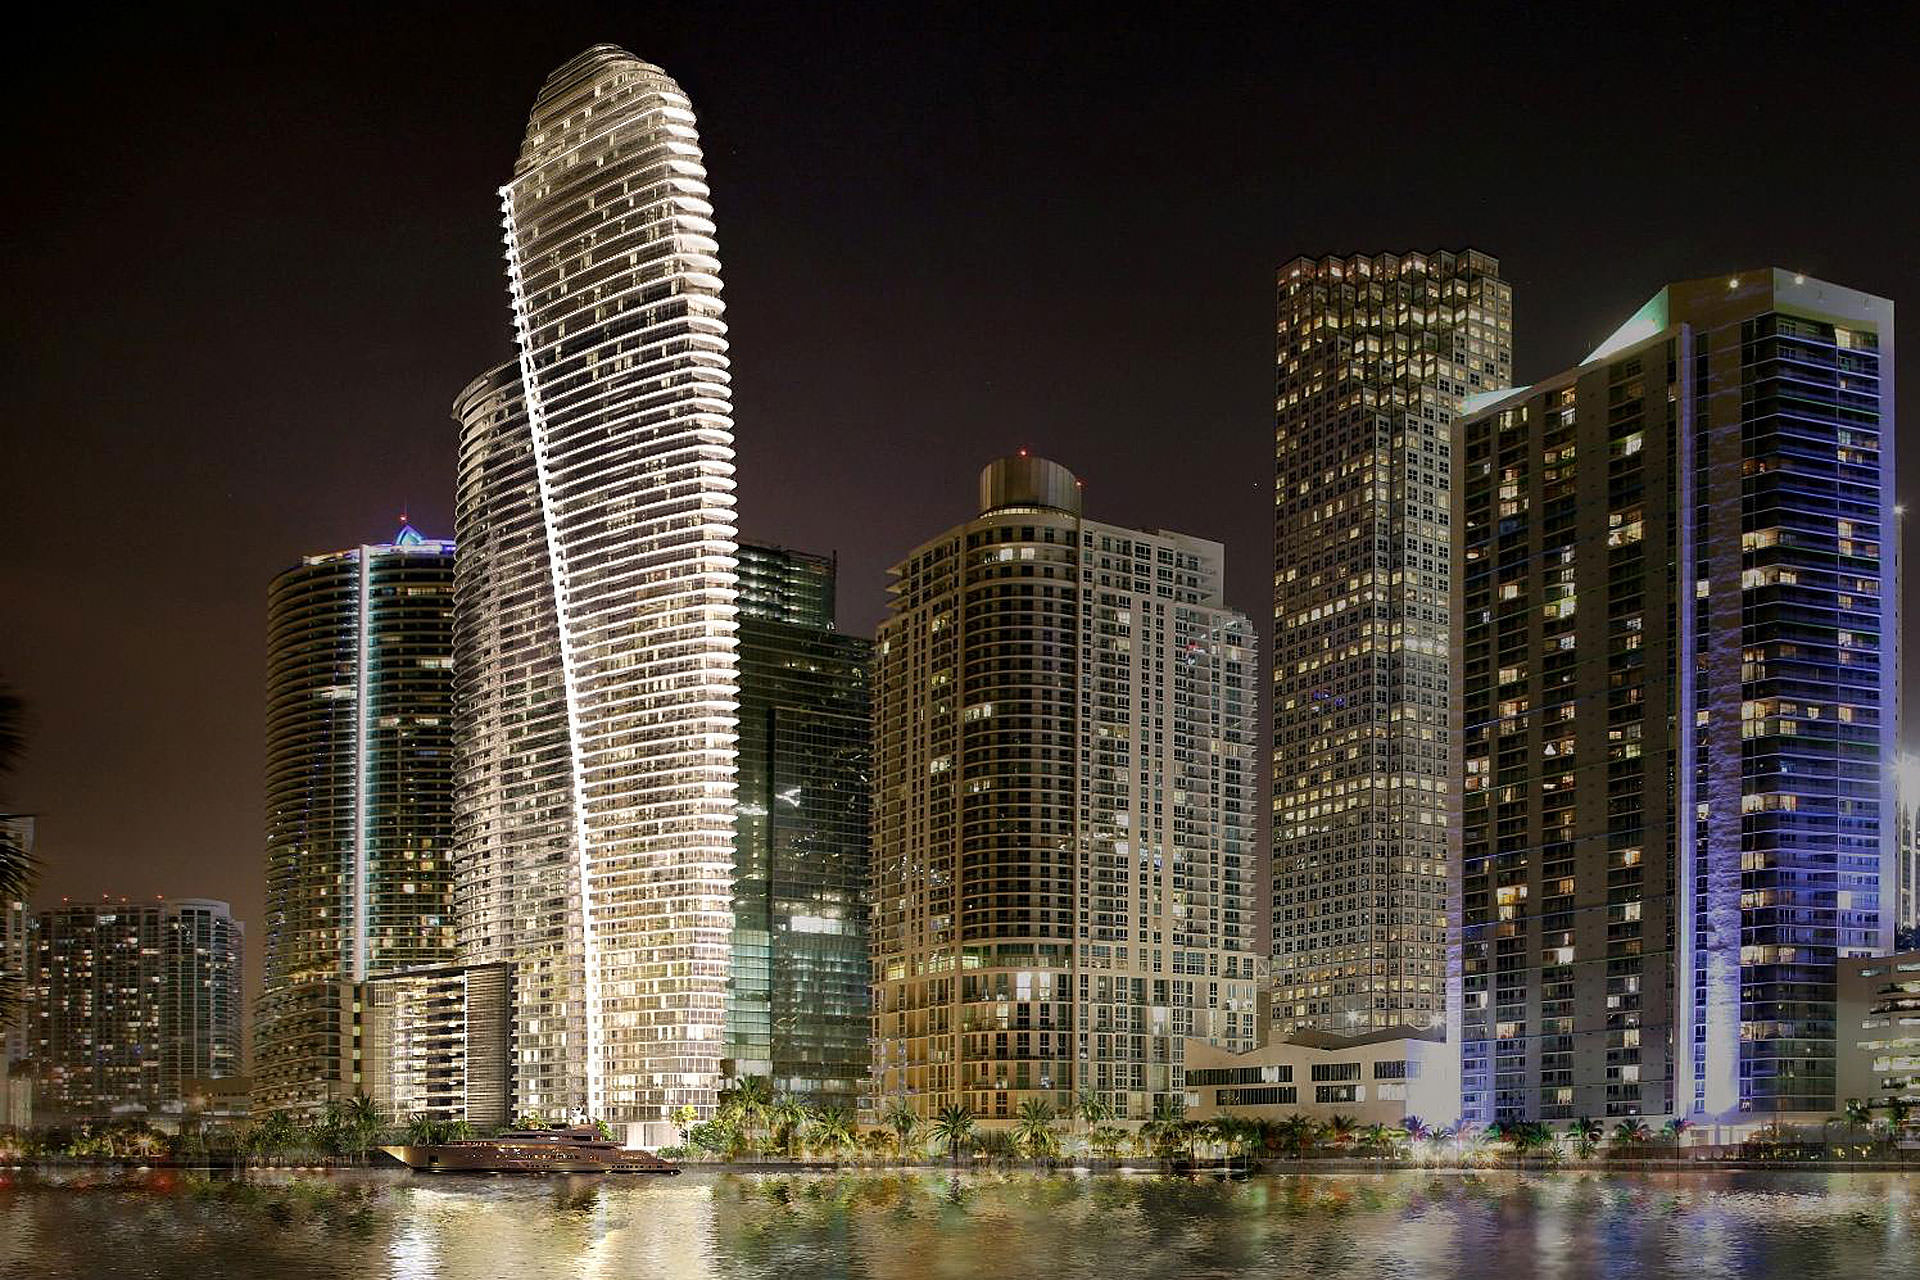 Updated: List of 10 towers planned to go vertical in Downton Miami in the next months